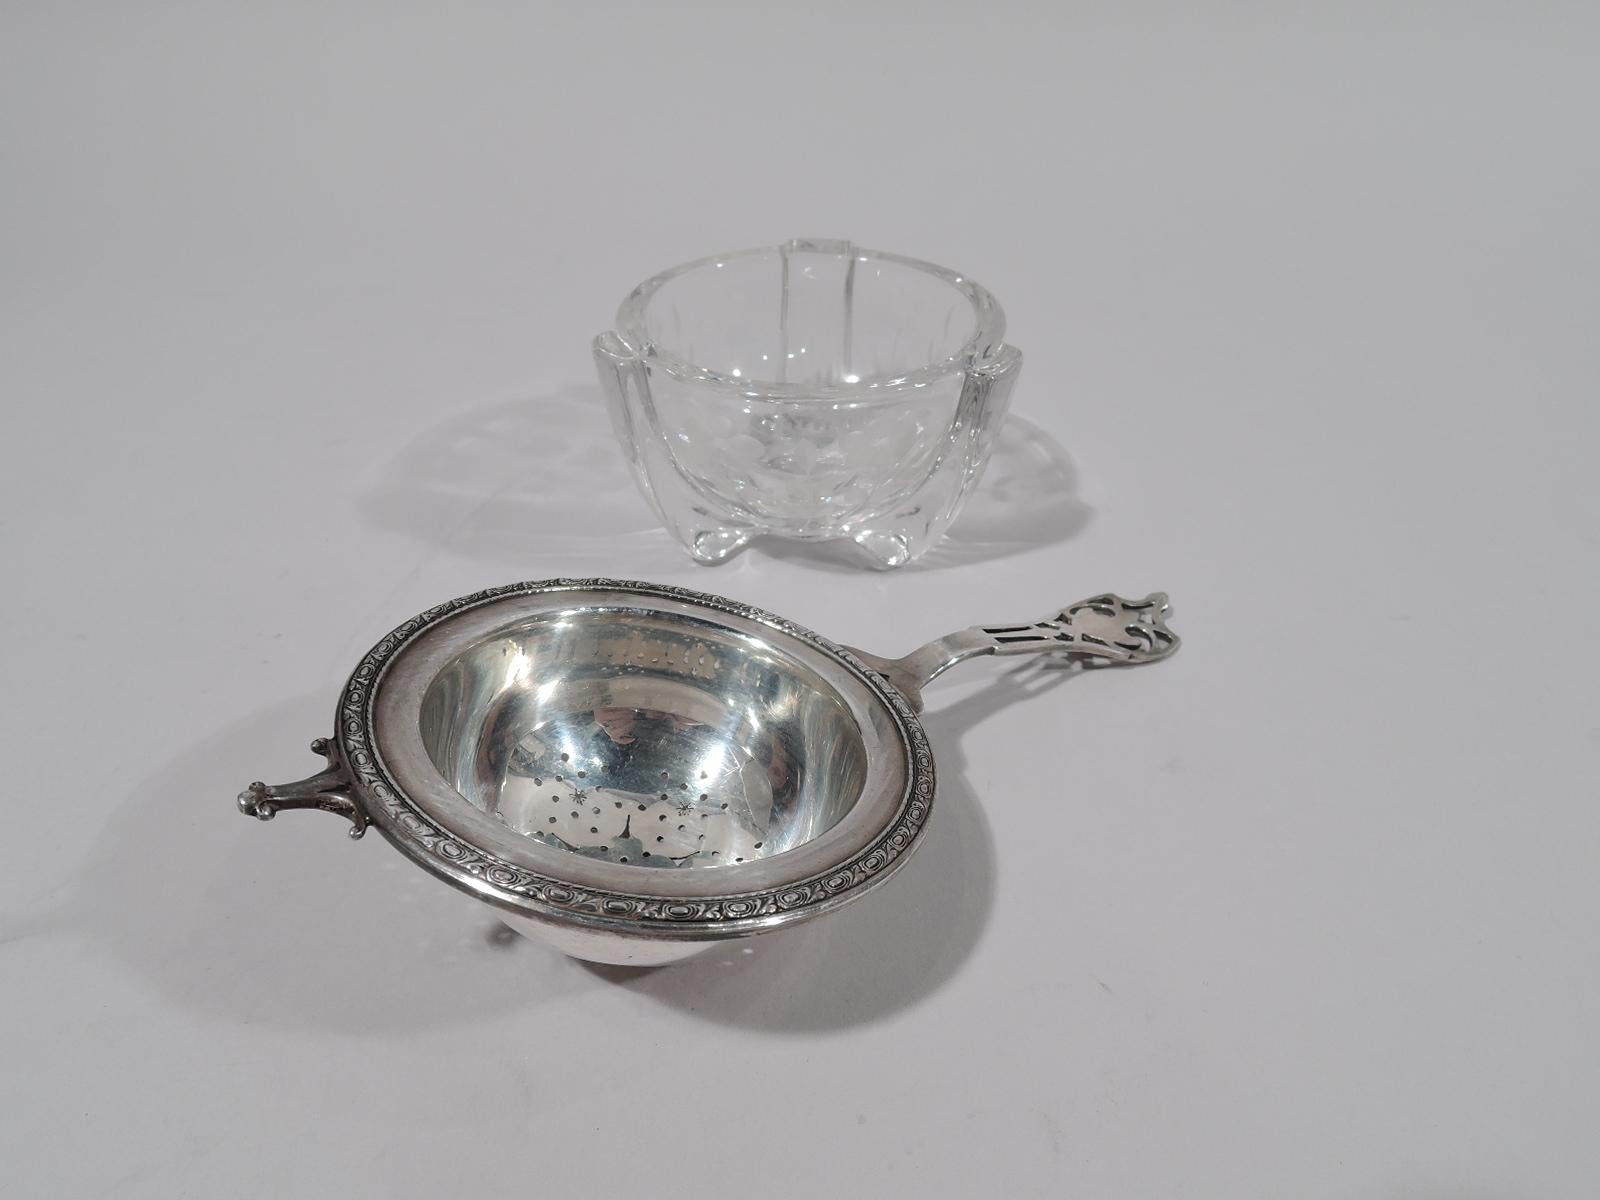 Edwardian sterling silver tea strainer. Made by Watson Company in Attleboro, ca 1920. Strainer: Round bowl with ornamental piercing; rim flat with leaf and guilloche border. Handle open with armorial terminal. Fully marked and numbered W49.